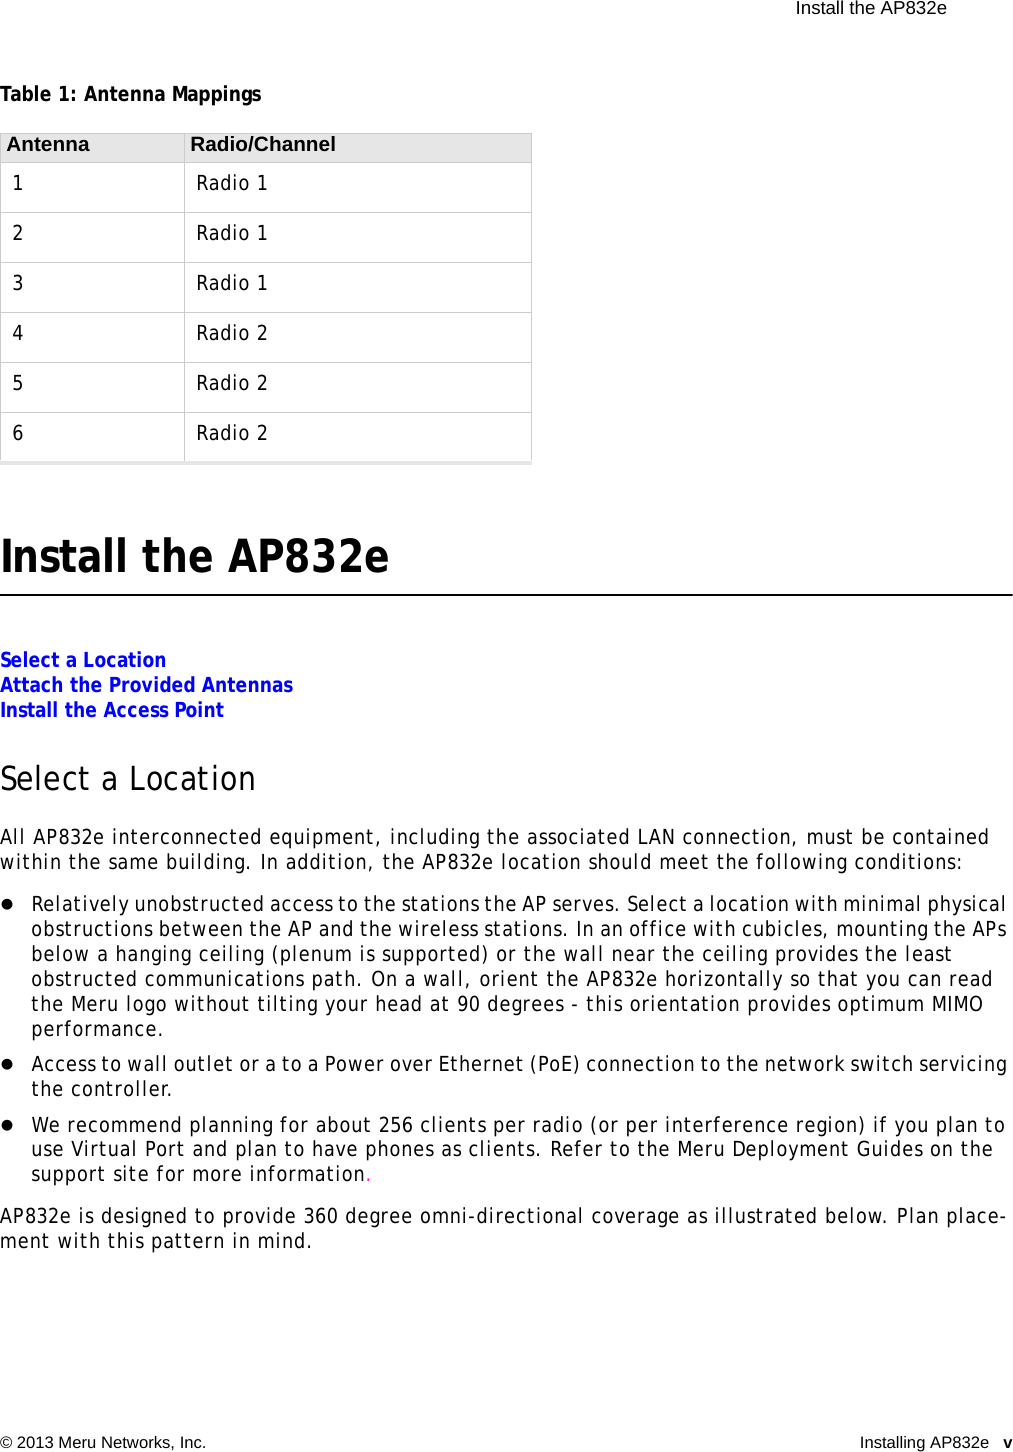  Install the AP832e © 2013 Meru Networks, Inc. Installing AP832e v Table 1: Antenna MappingsInstall the AP832eSelect a LocationAttach the Provided AntennasInstall the Access PointSelect a LocationAll AP832e interconnected equipment, including the associated LAN connection, must be contained within the same building. In addition, the AP832e location should meet the following conditions:Relatively unobstructed access to the stations the AP serves. Select a location with minimal physical obstructions between the AP and the wireless stations. In an office with cubicles, mounting the APs below a hanging ceiling (plenum is supported) or the wall near the ceiling provides the least obstructed communications path. On a wall, orient the AP832e horizontally so that you can read the Meru logo without tilting your head at 90 degrees - this orientation provides optimum MIMO performance. Access to wall outlet or a to a Power over Ethernet (PoE) connection to the network switch servicing the controller. We recommend planning for about 256 clients per radio (or per interference region) if you plan to use Virtual Port and plan to have phones as clients. Refer to the Meru Deployment Guides on the support site for more information.AP832e is designed to provide 360 degree omni-directional coverage as illustrated below. Plan place-ment with this pattern in mind. Antenna Radio/Channel1Radio 12Radio 13Radio 14Radio 25Radio 26Radio 2